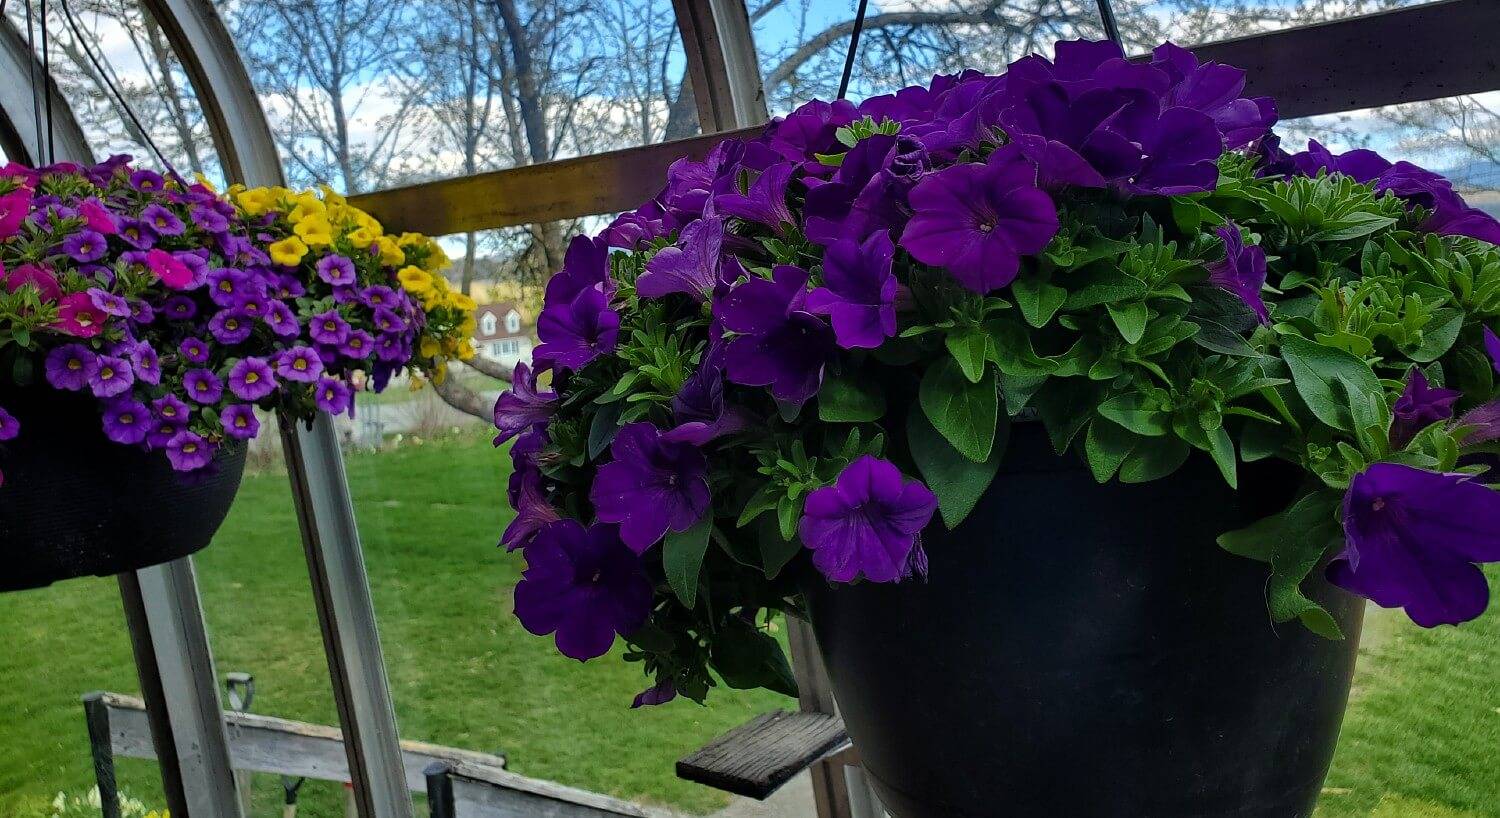 Greenhouse showing flower pots full of bright purple, pink and yellow flowers